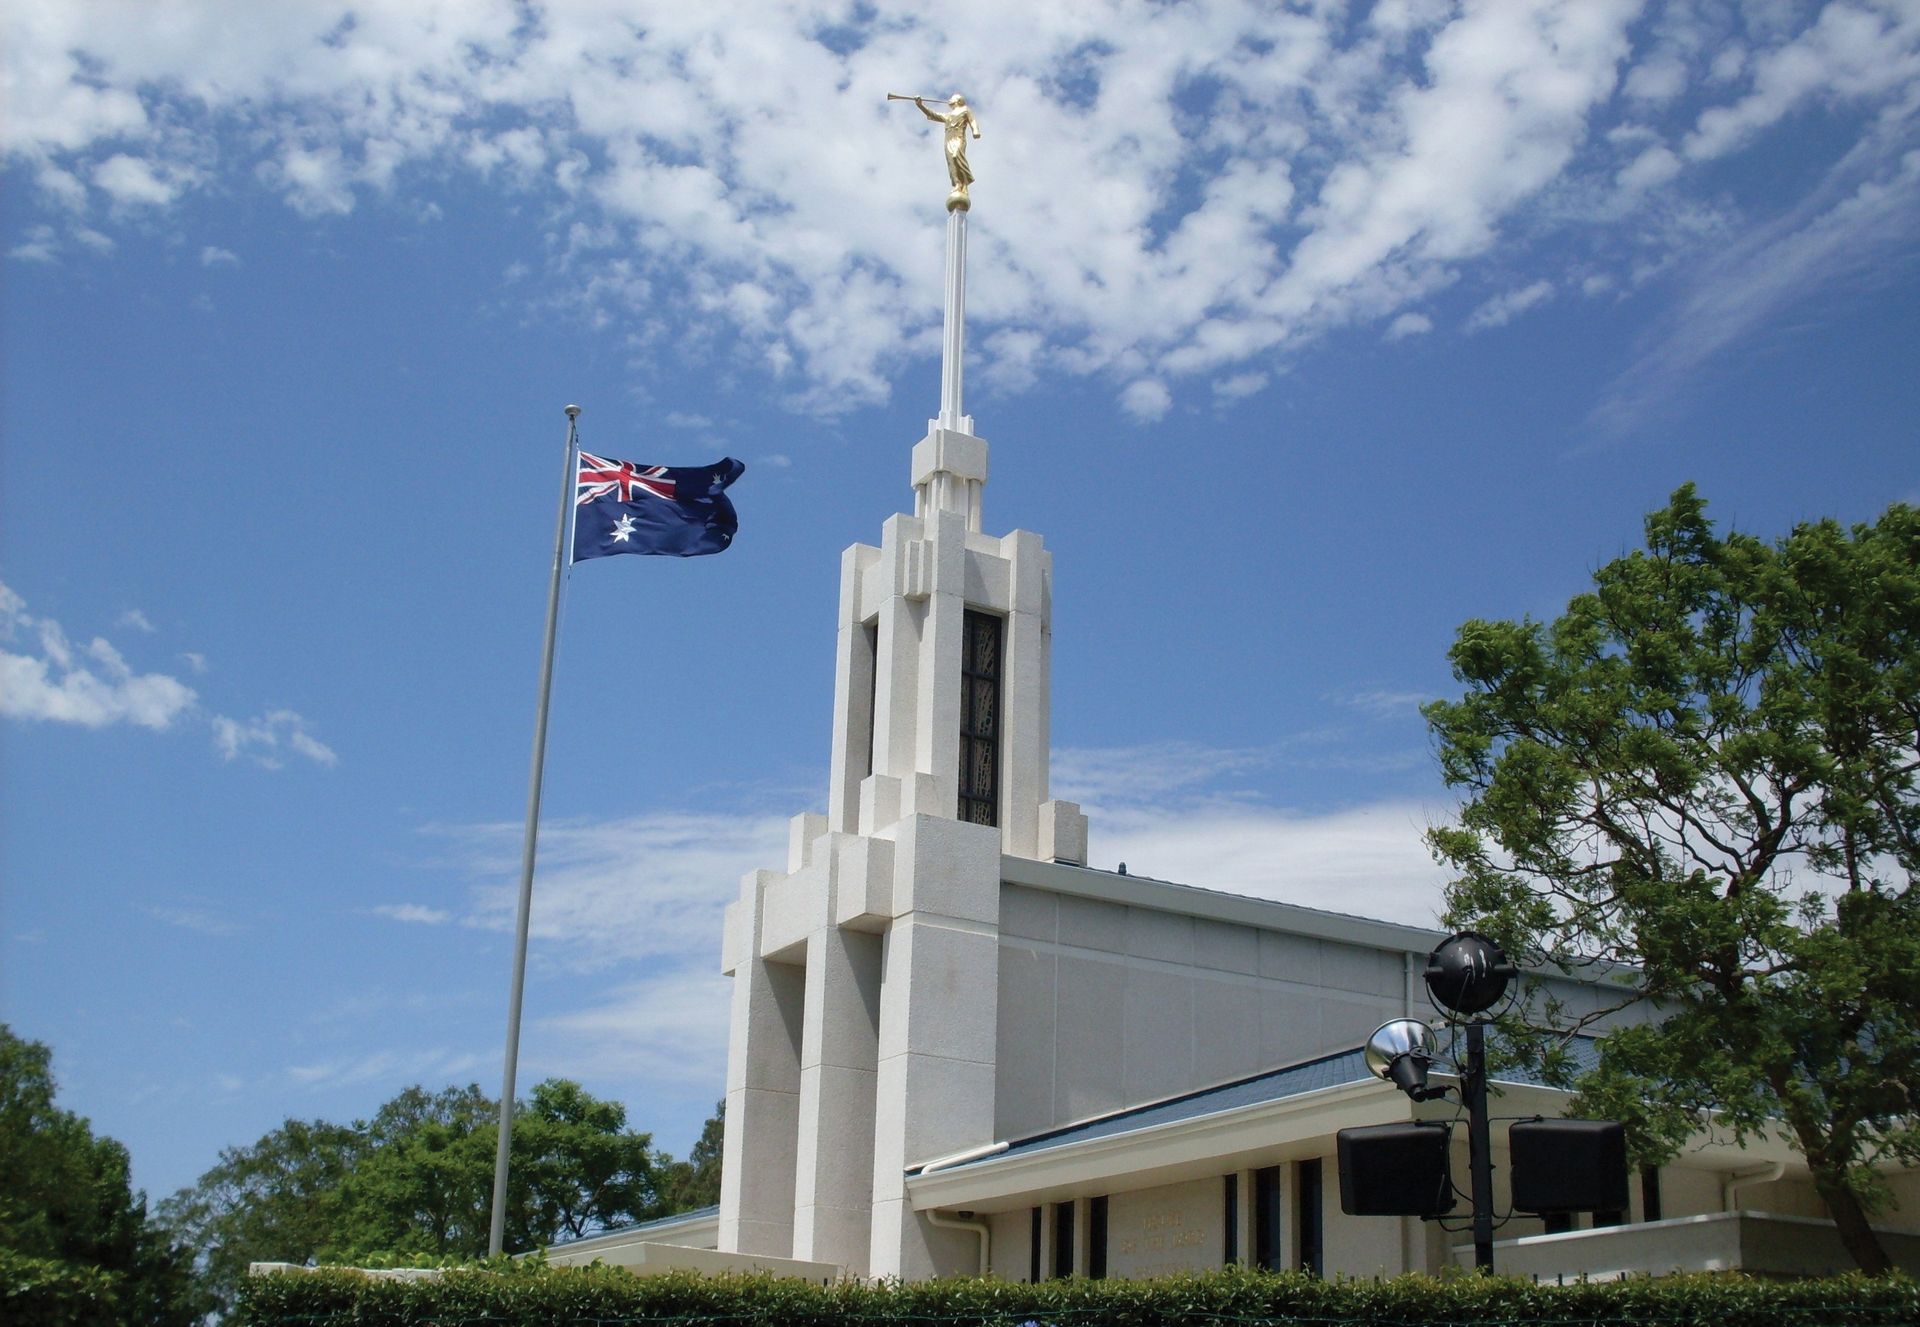 The Sydney Australia Temple entrance, including scenery, the exterior of the temple, and the flag.